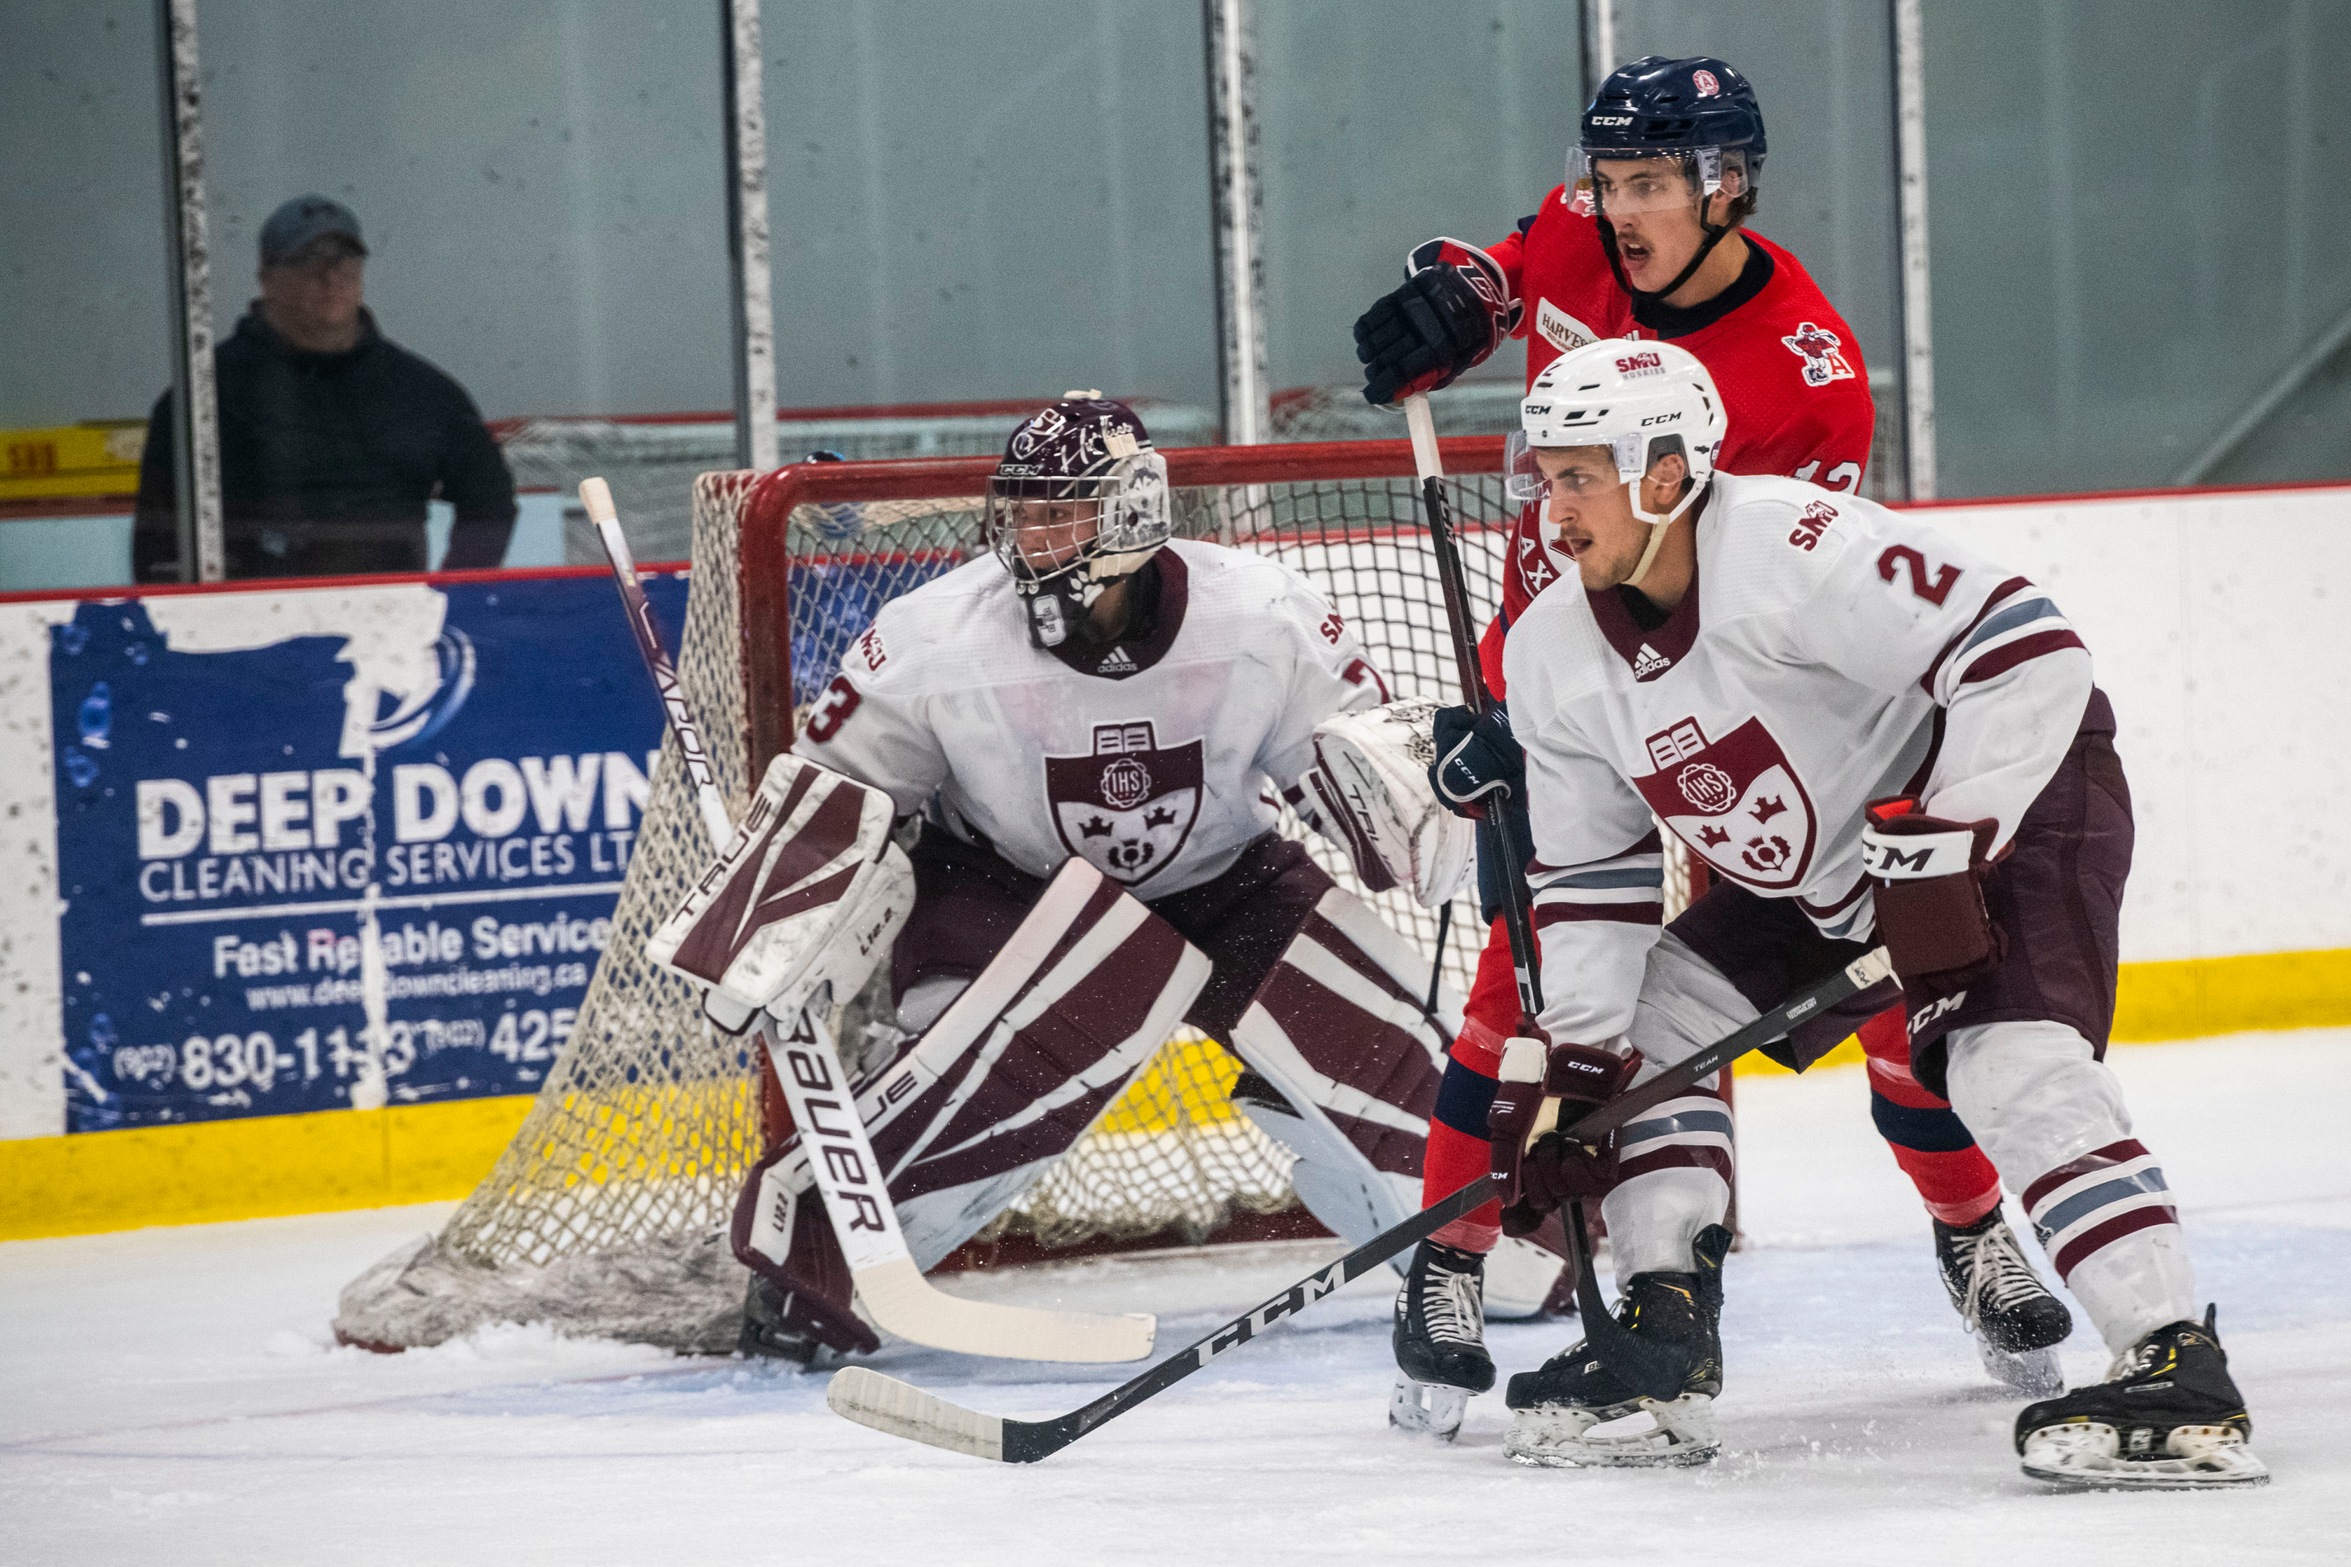 Welsh records another shutout as #4 ranked Huskies defeat Acadia 4-0